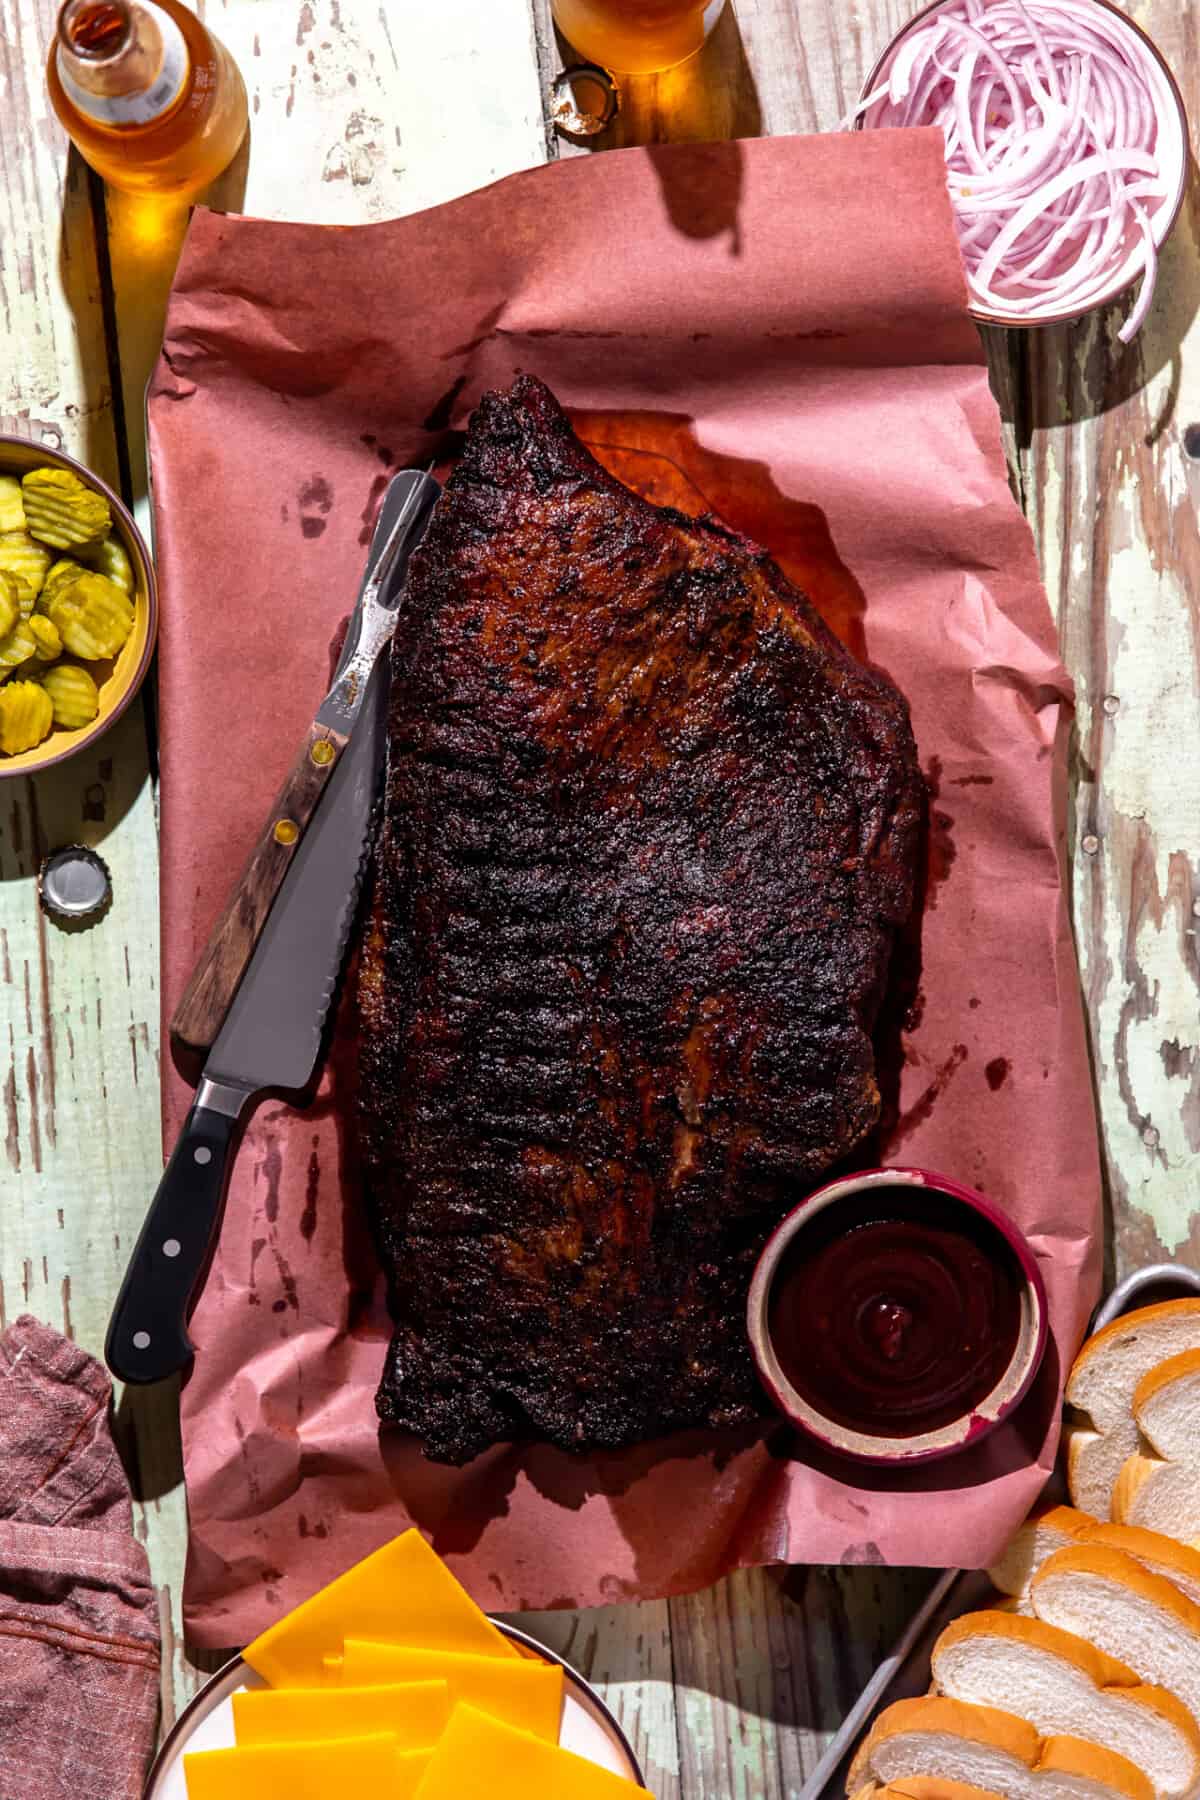 Smoked brisket ready to serve and sides served.